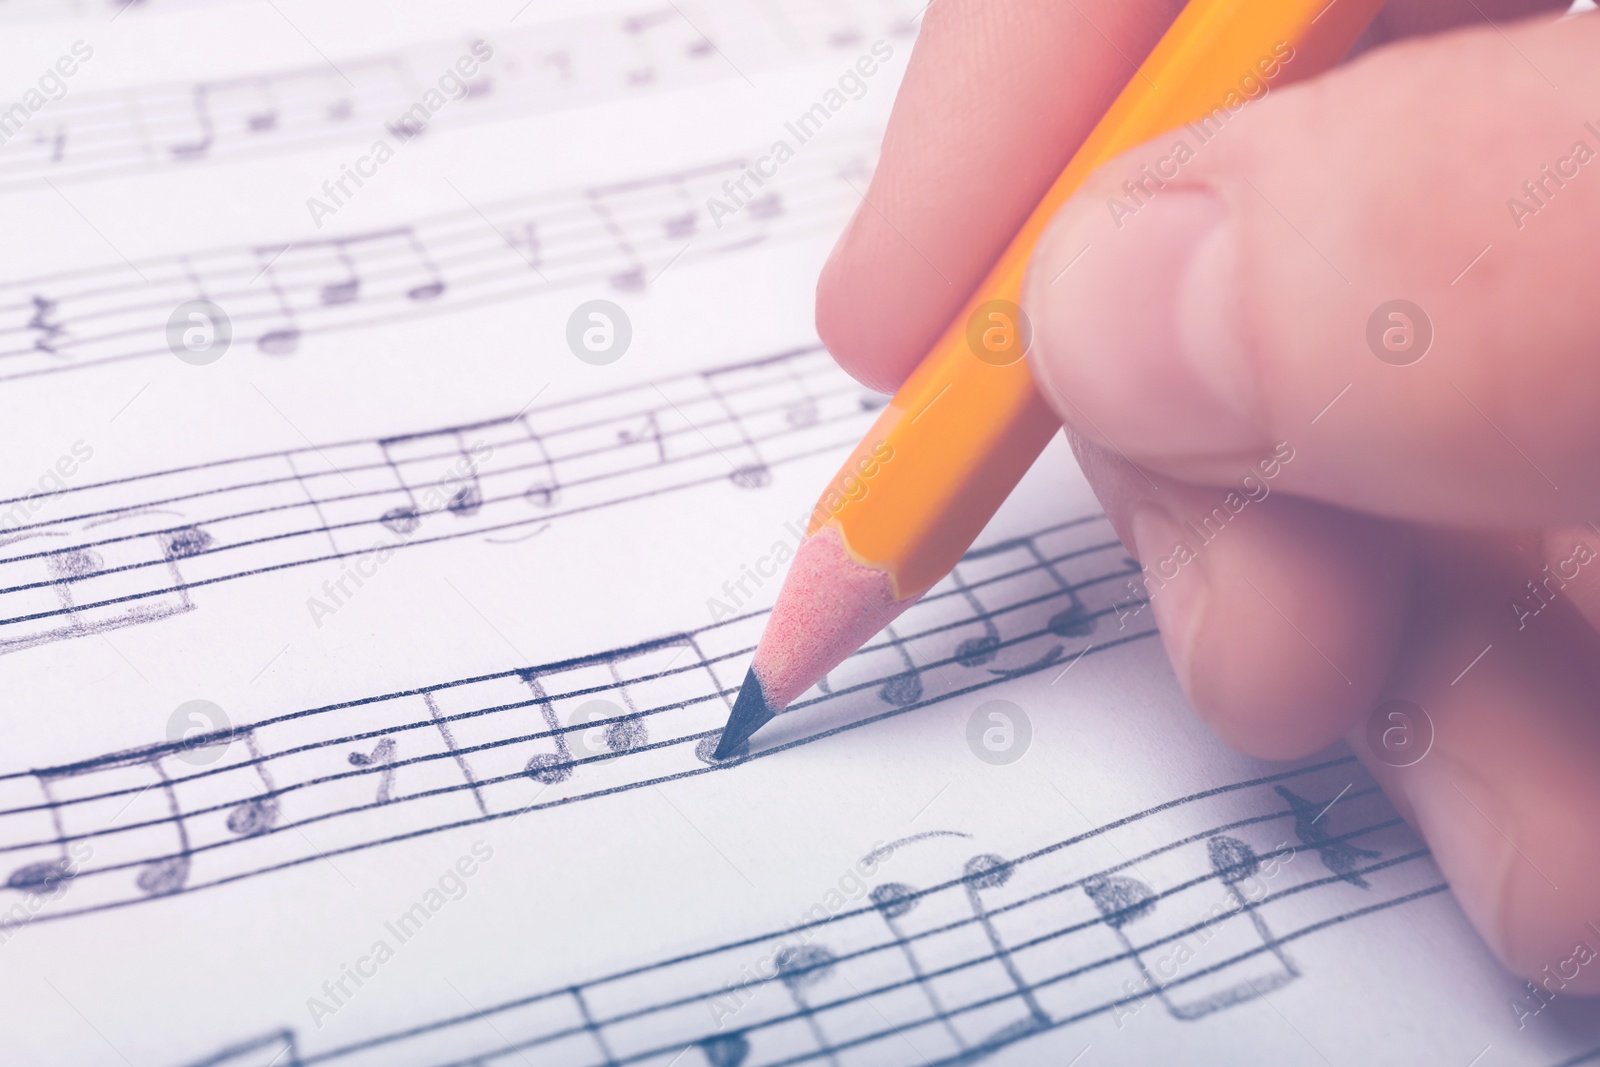 Image of Woman writing music notes on sheet with pencil, closeup